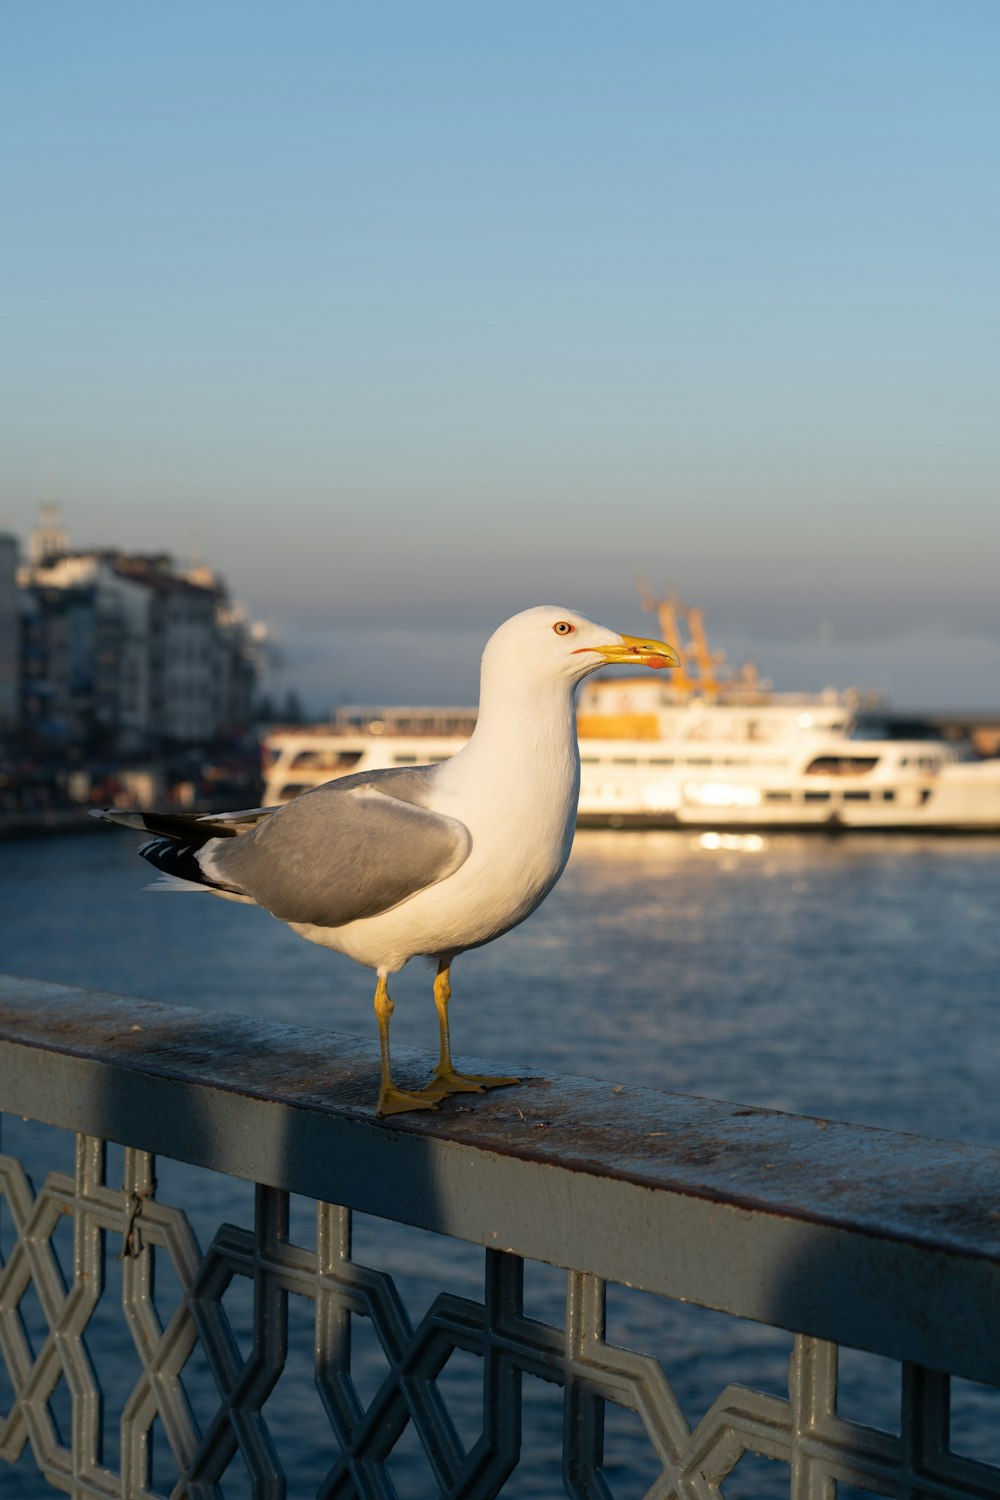 a seagull is standing on a railing near the water